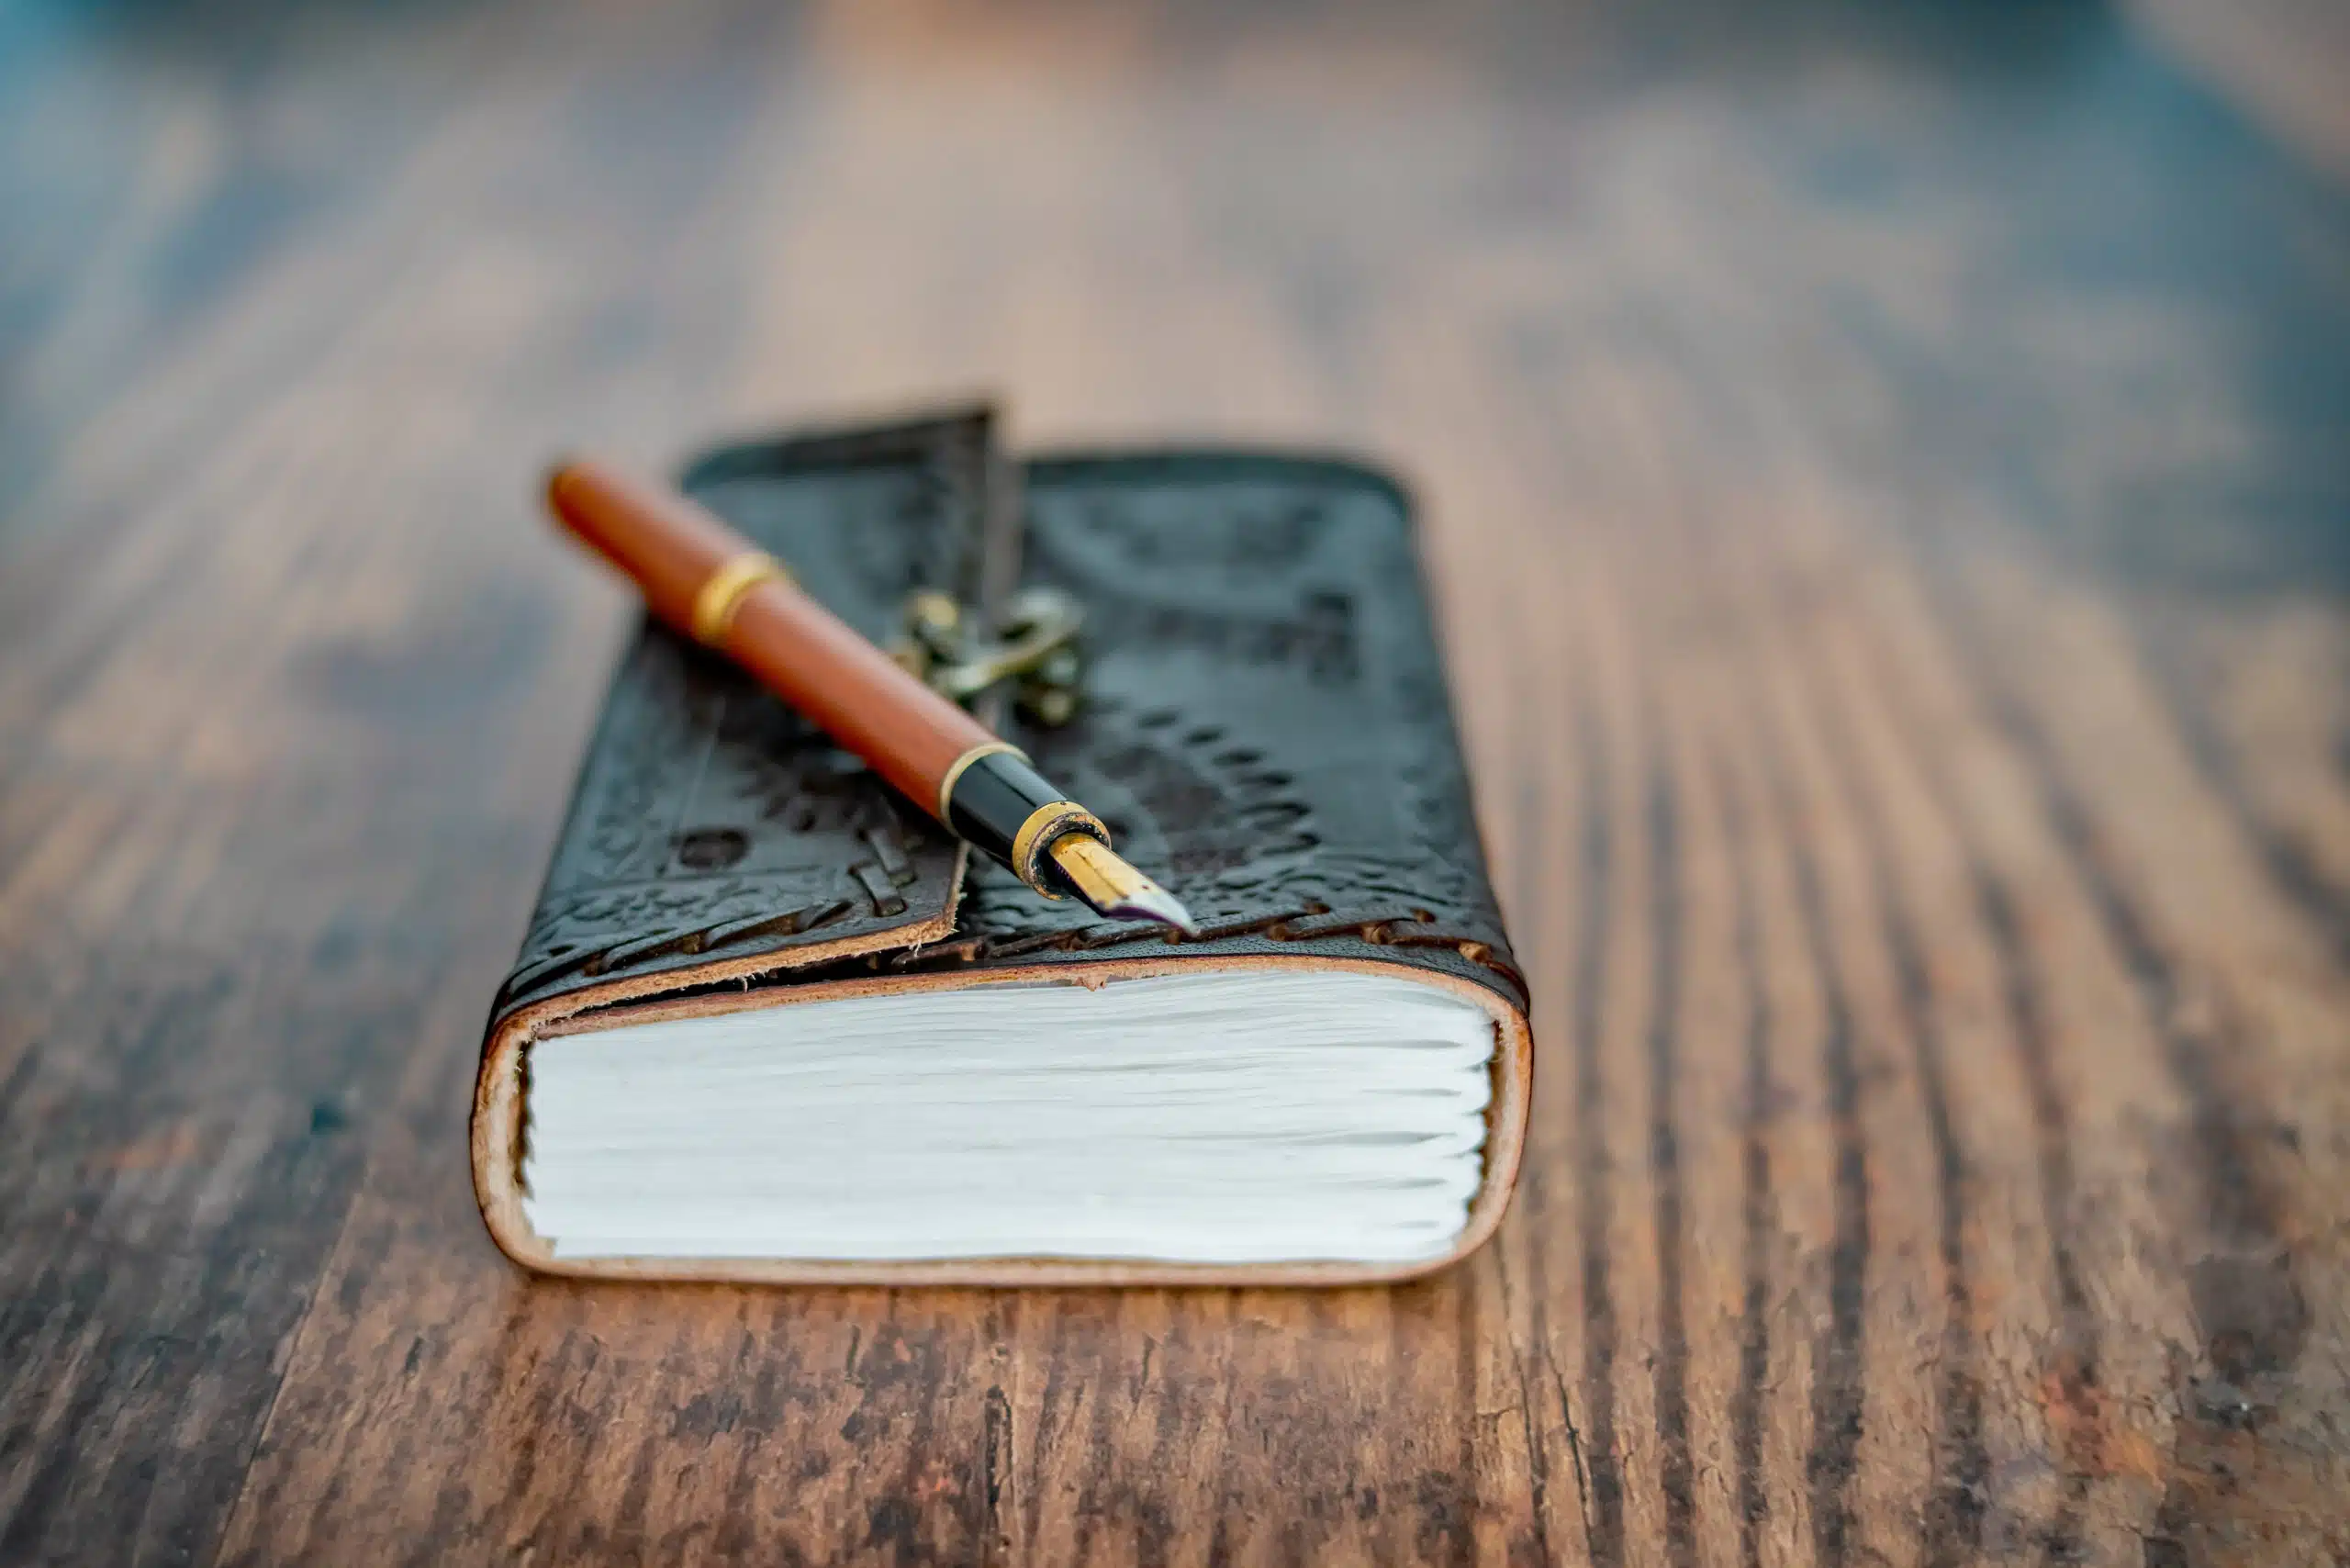 A wooden fountain pen and leather-bound notebook.